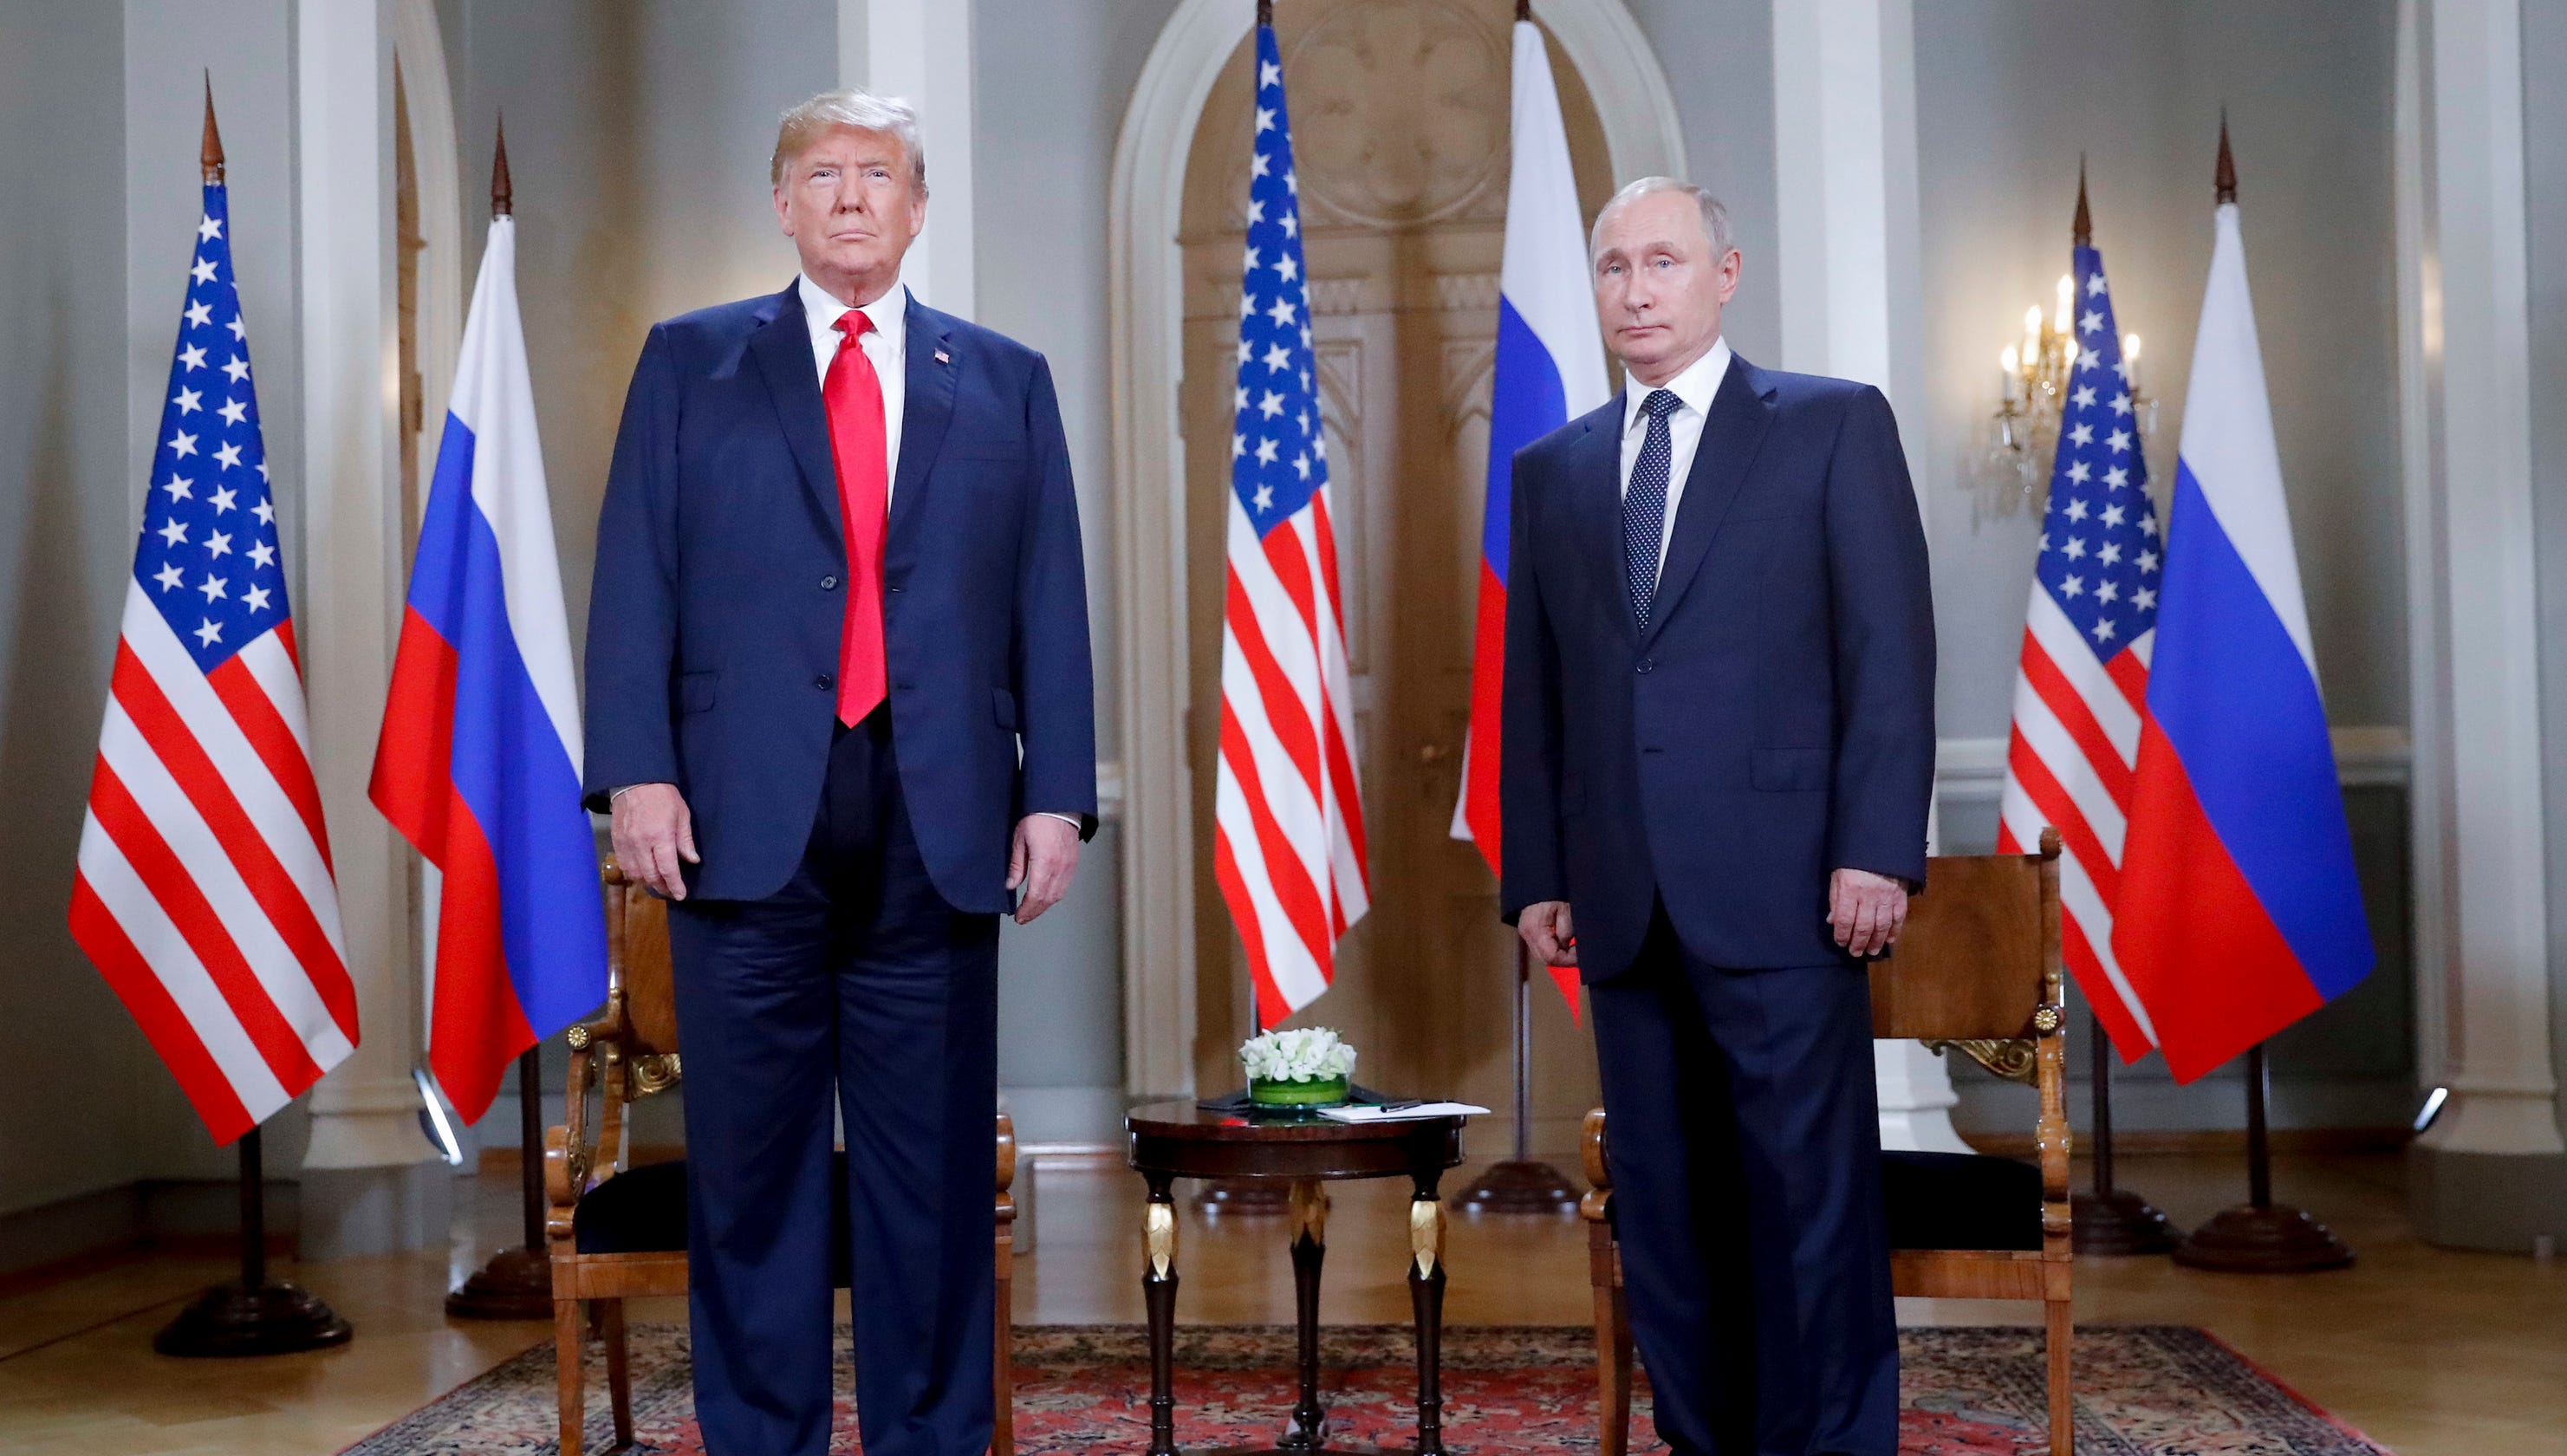 putin-trump-meeting-in-washington-is-out-of-question-kremlin-says